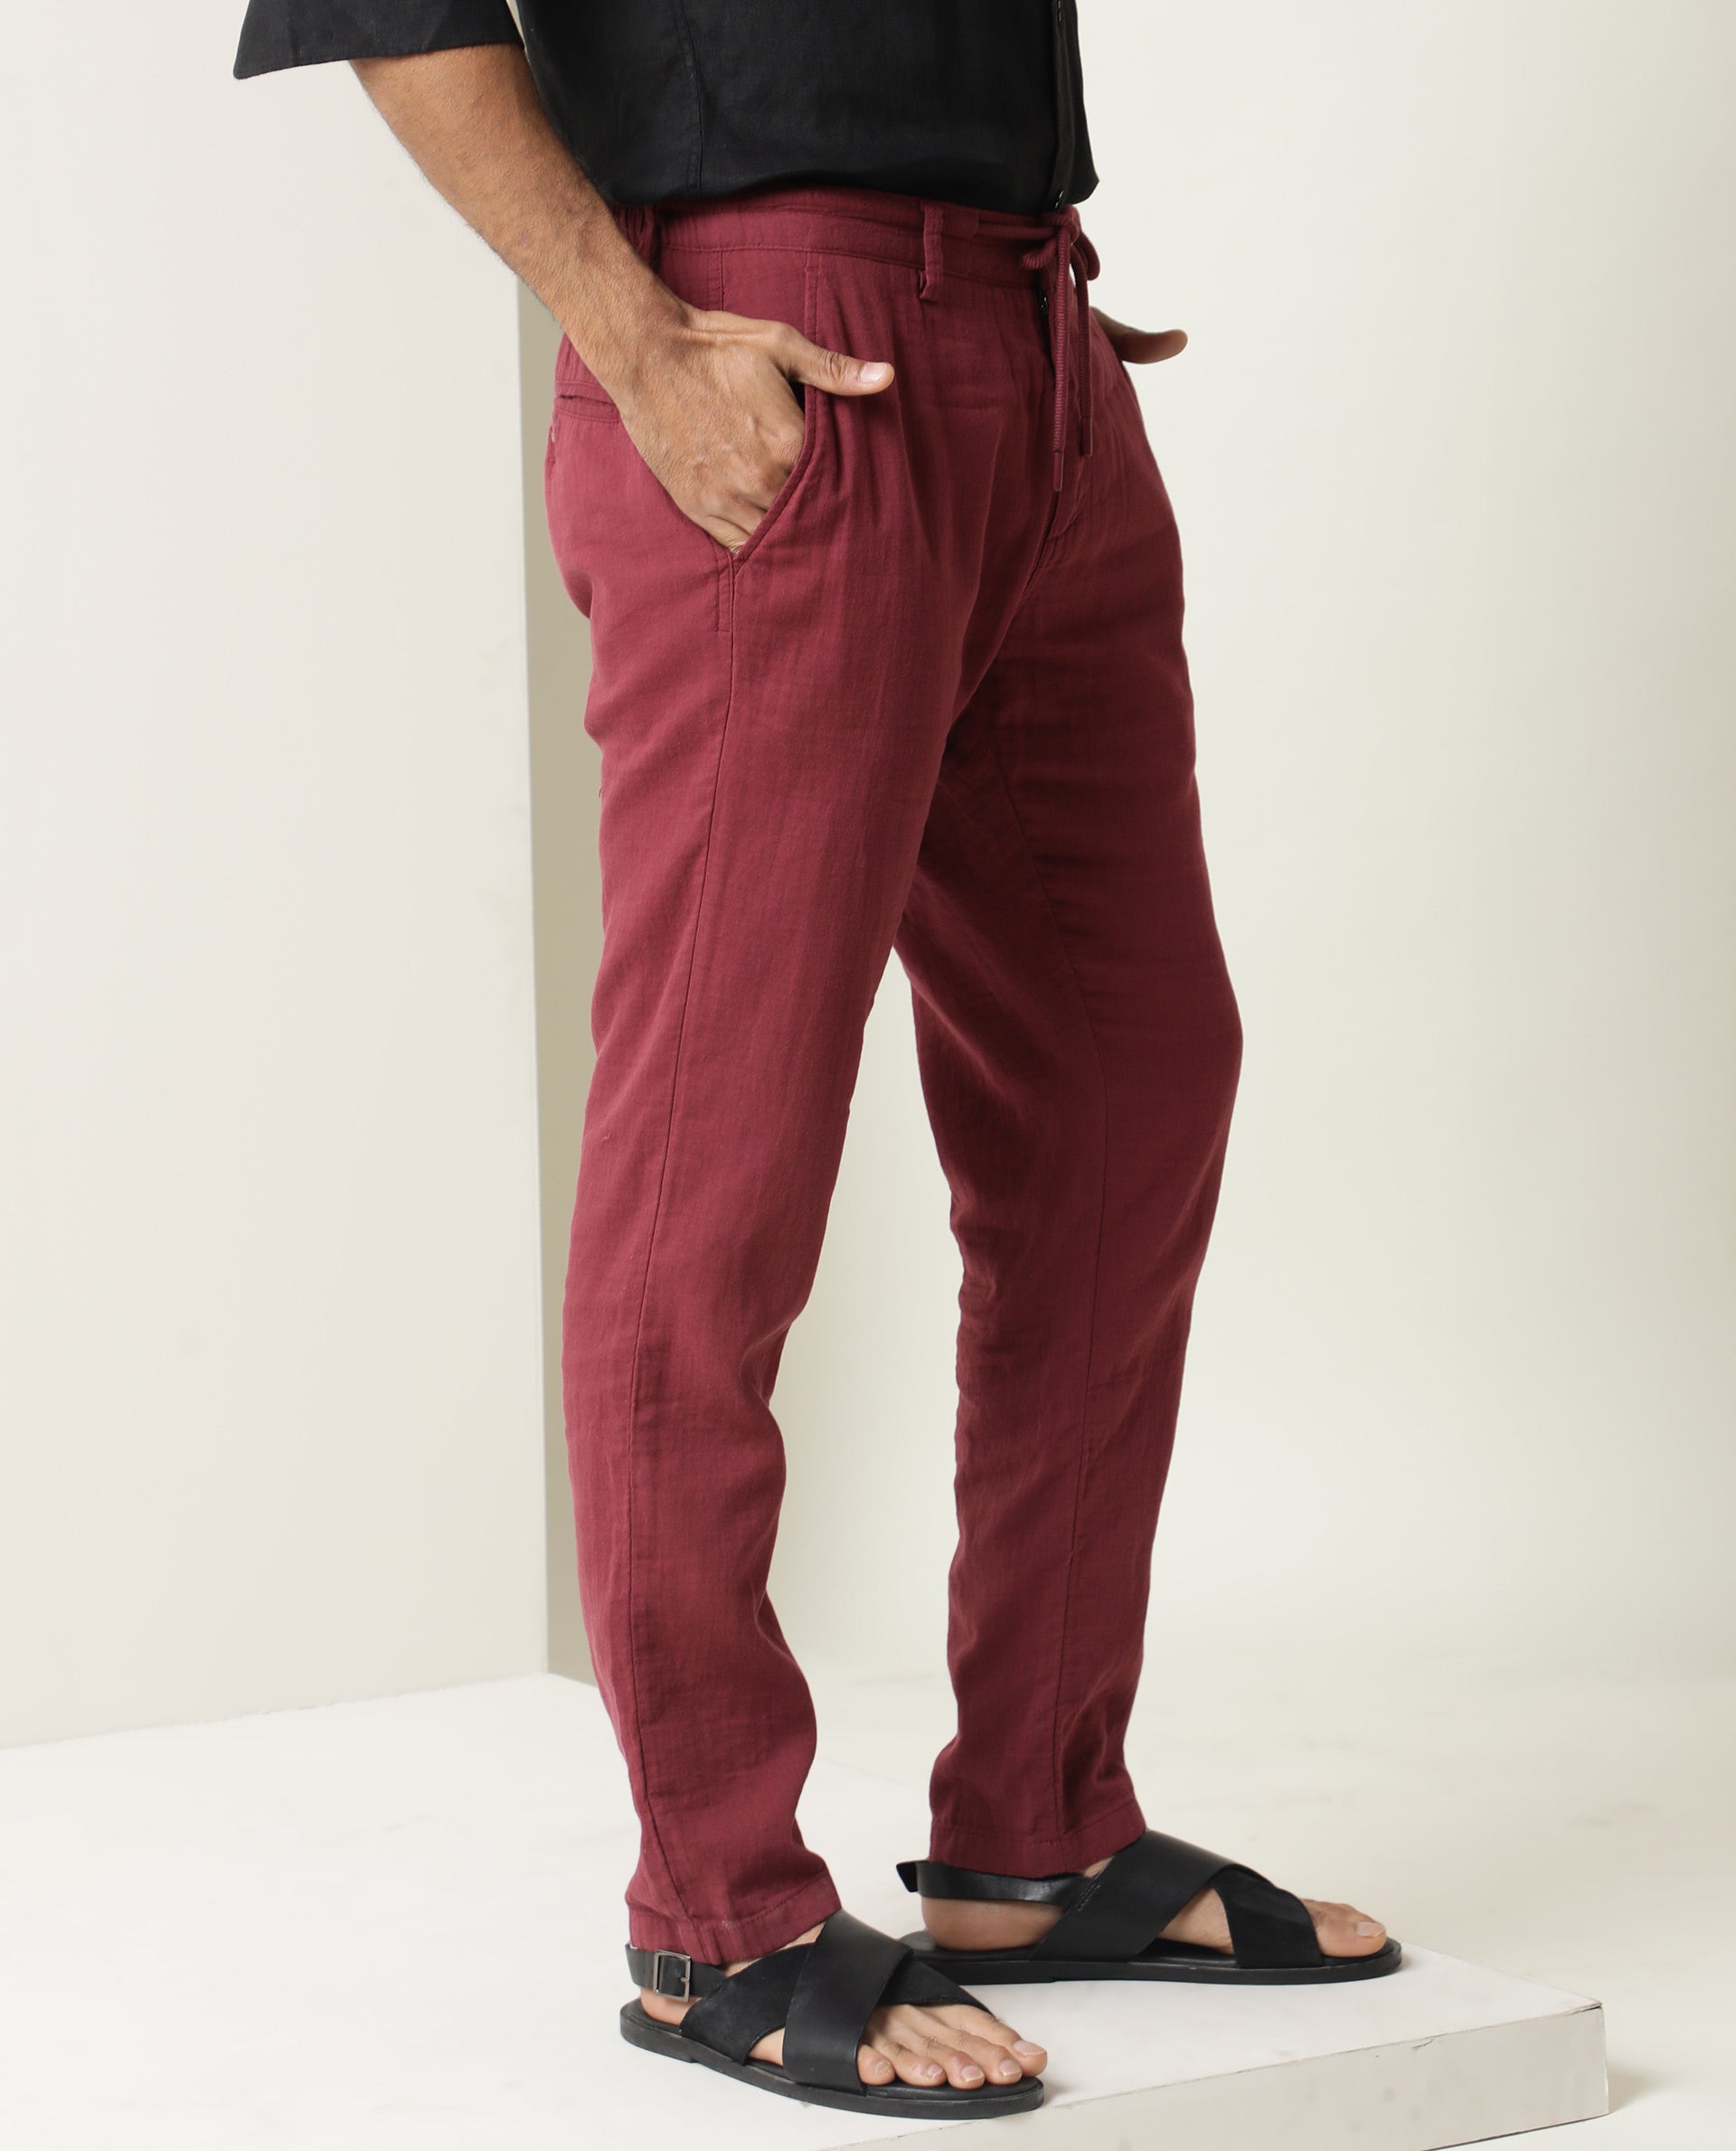 Men Red Trousers  Buy Men Red Trousers online in India